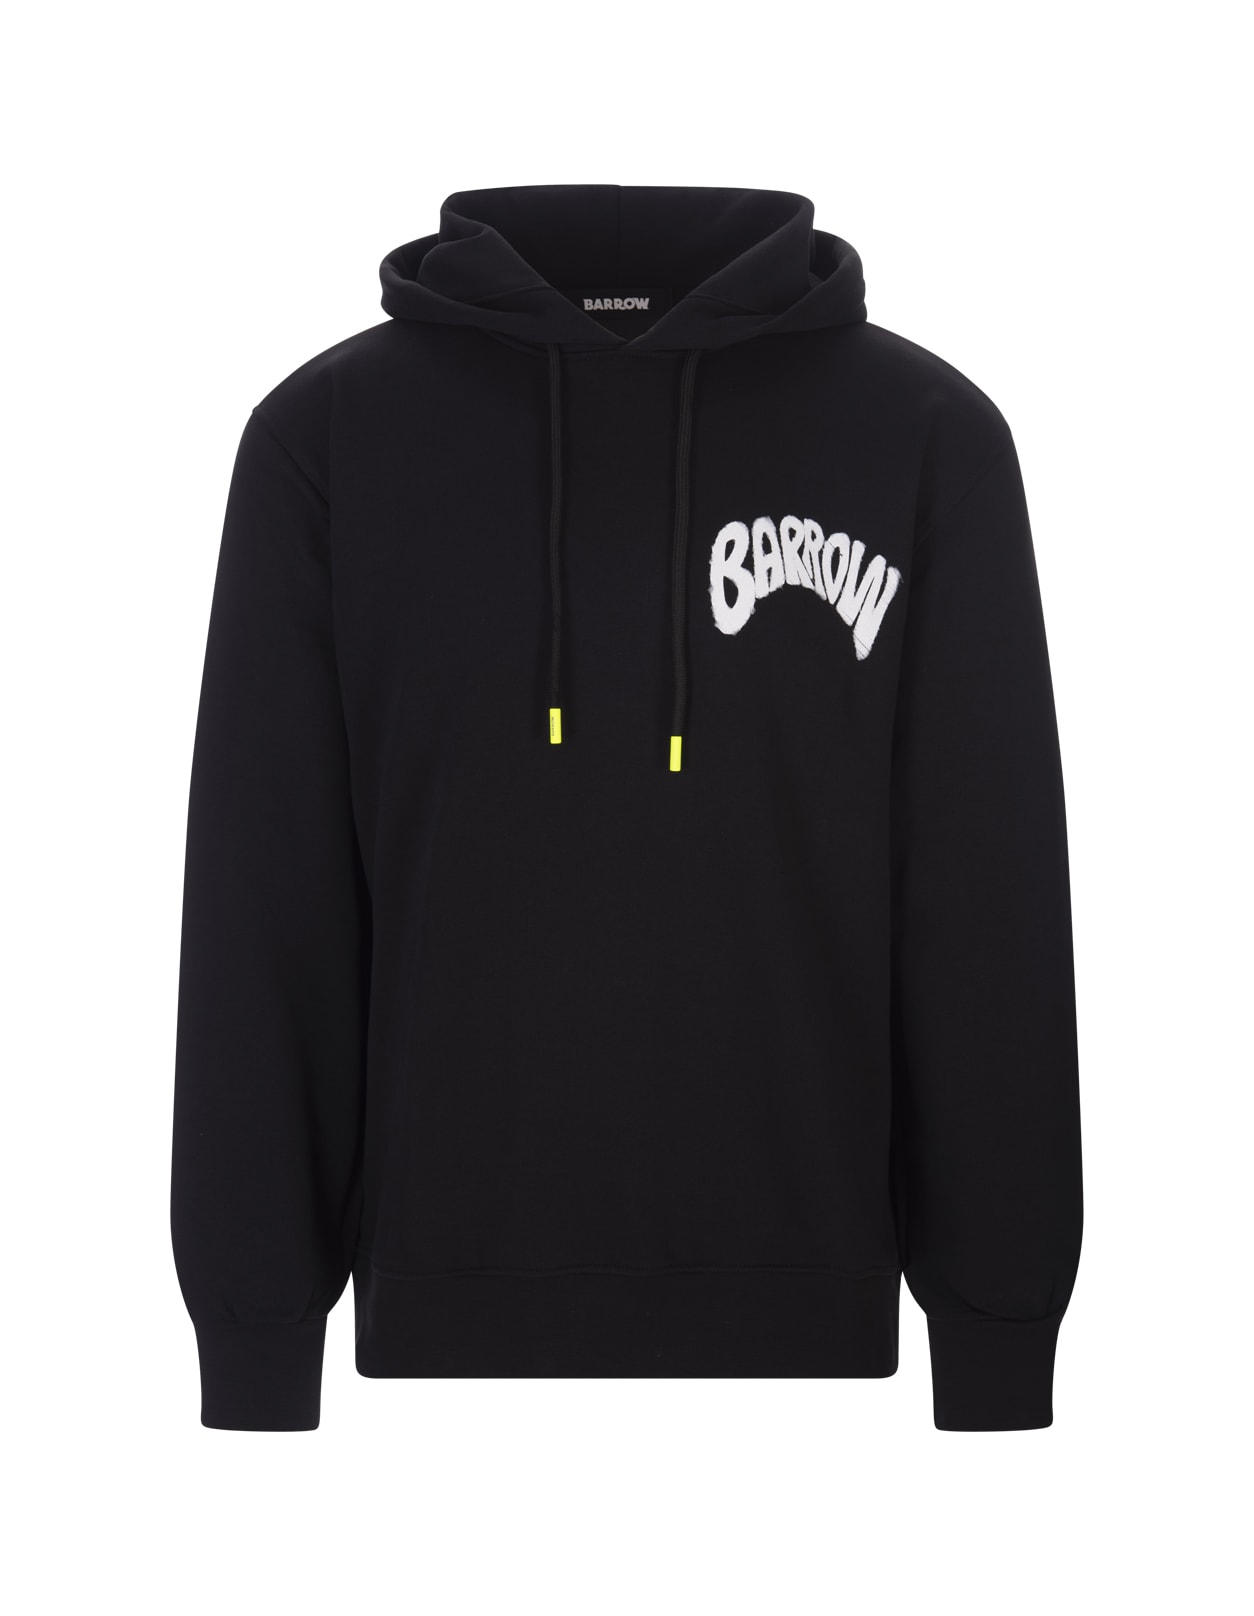 BARROW BLACK HOODIE WITH FRONT AND BACK LOGO PRINT